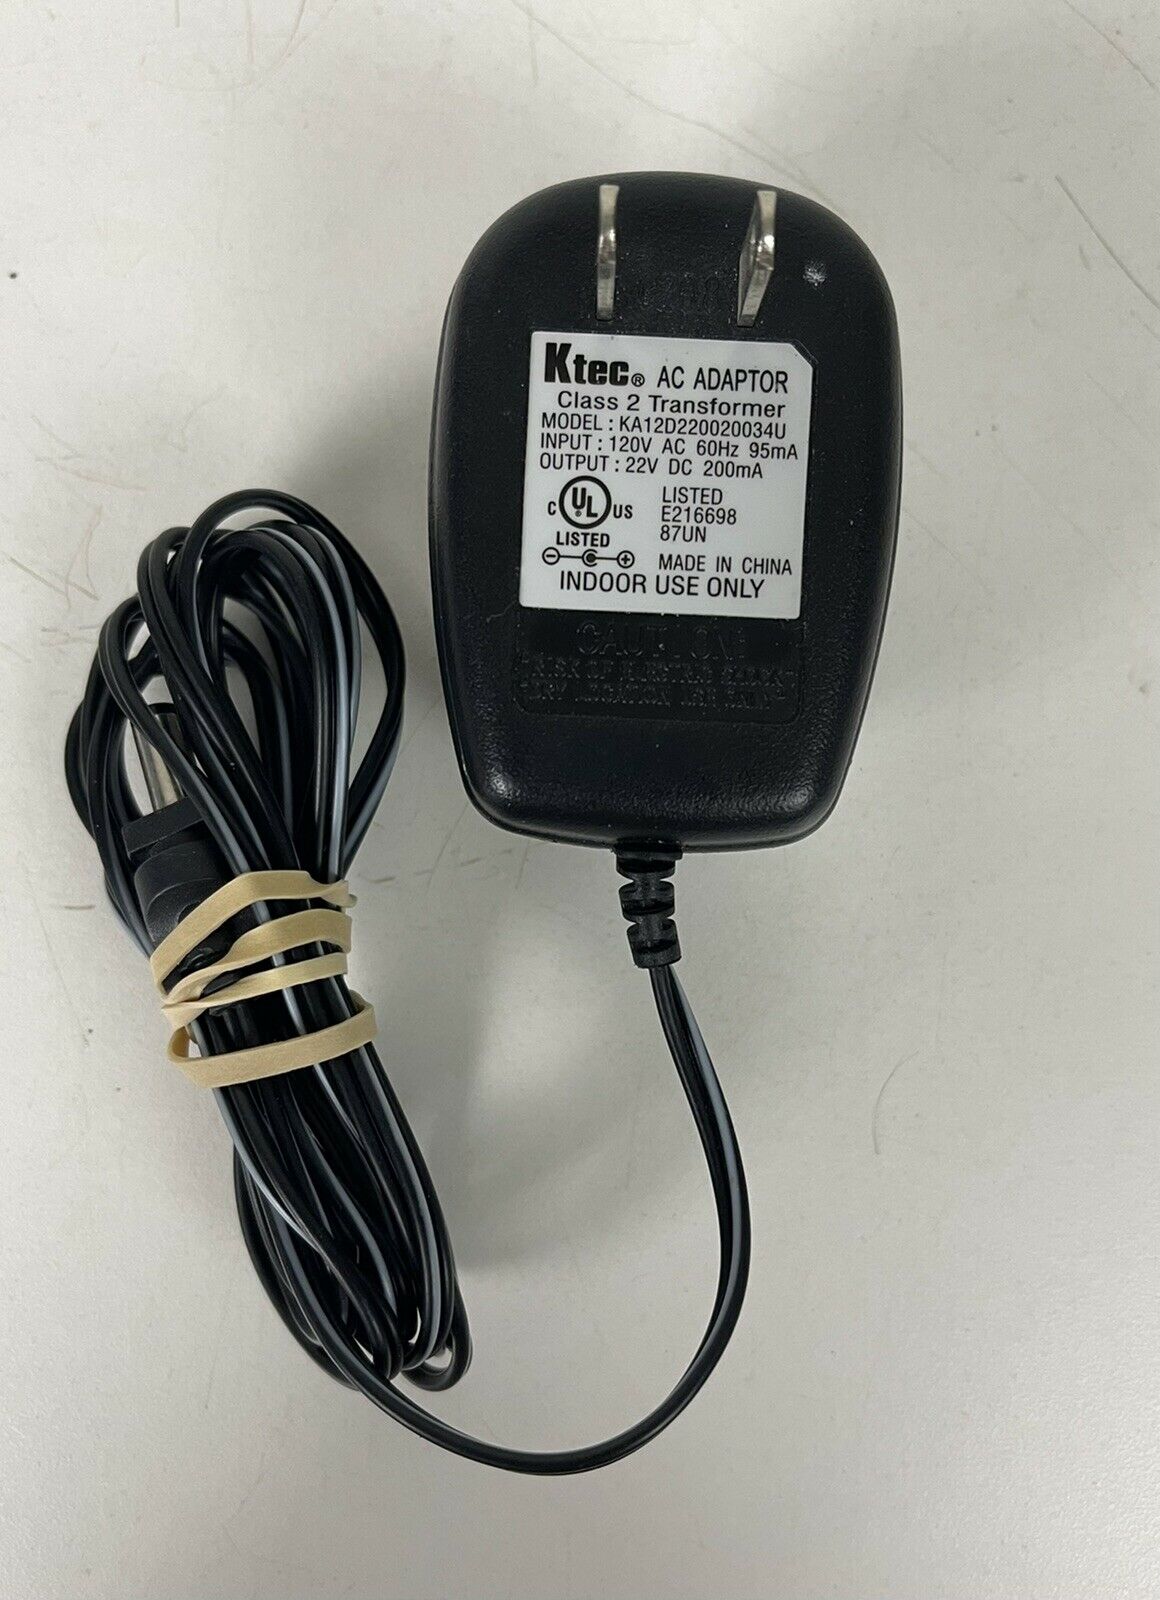 22V AC/DC Adapter For Ktec KA12D220020034U Class 2 Transformer Power Supply Cord Features: new Output Voltage: 22V Br